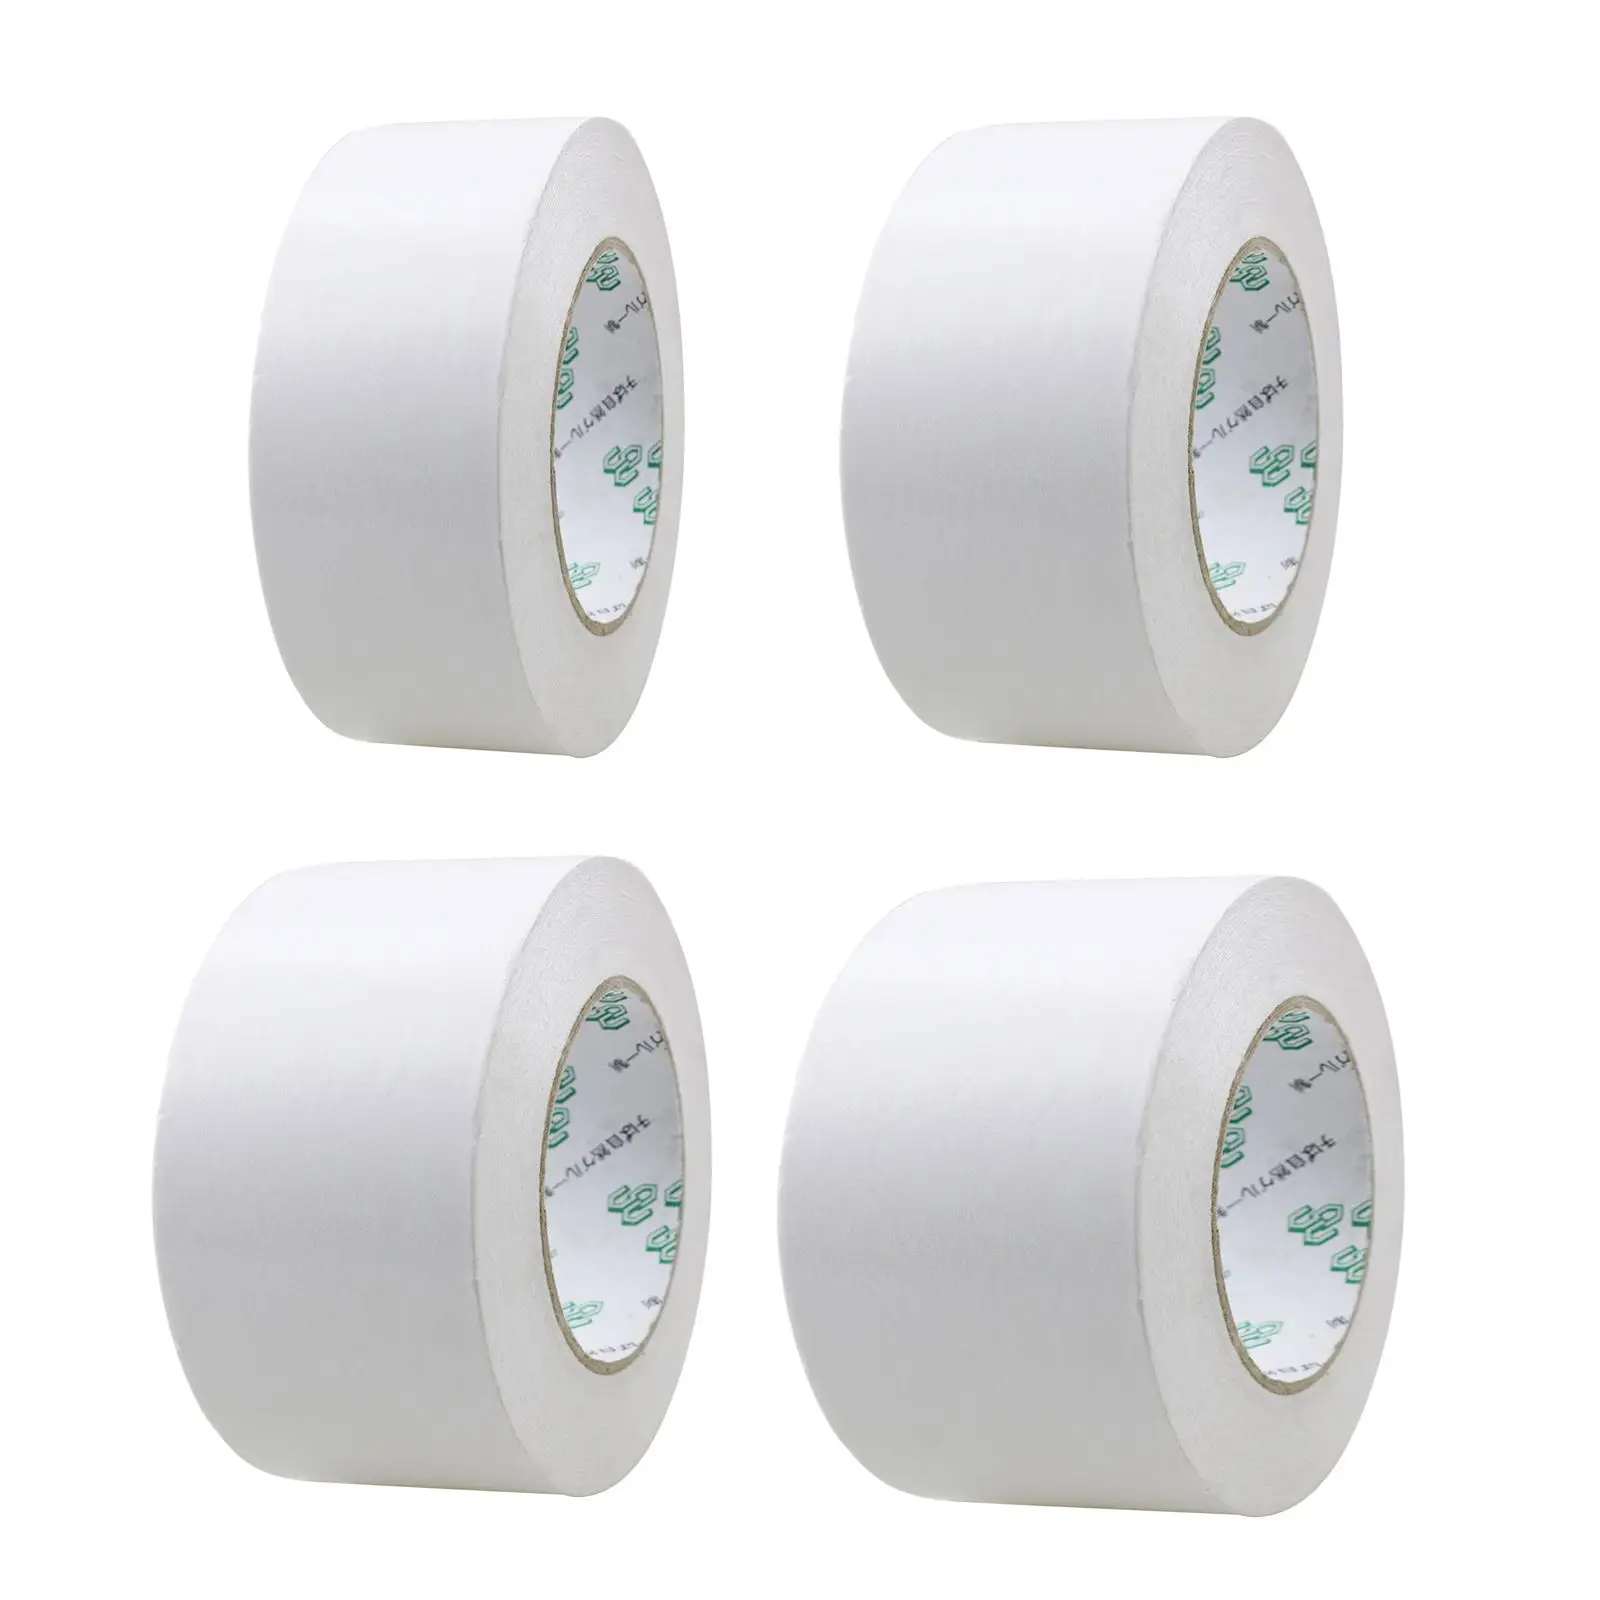 1 Roll 5 Double Sided Golf Club Grip Multifunctional Putter Tape, Strong 0/35/40/50mm Width